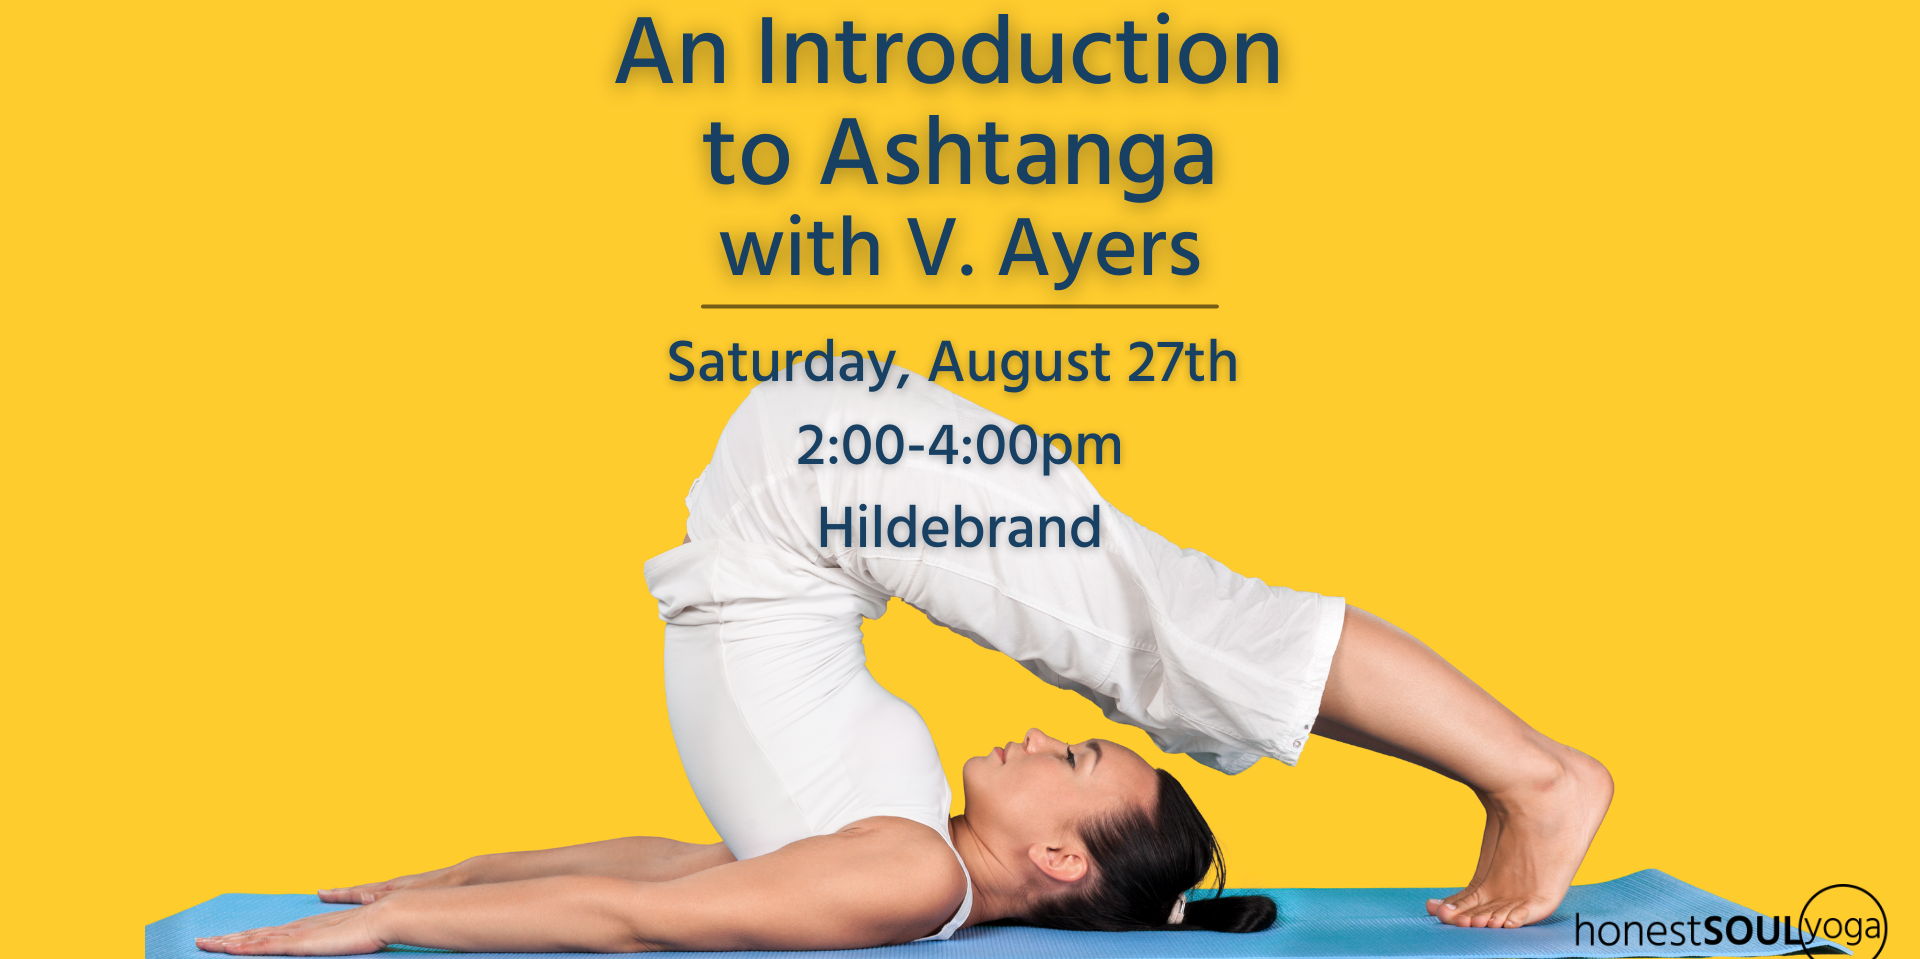 An Introduction to Ashtanga with V. Ayers promotional image